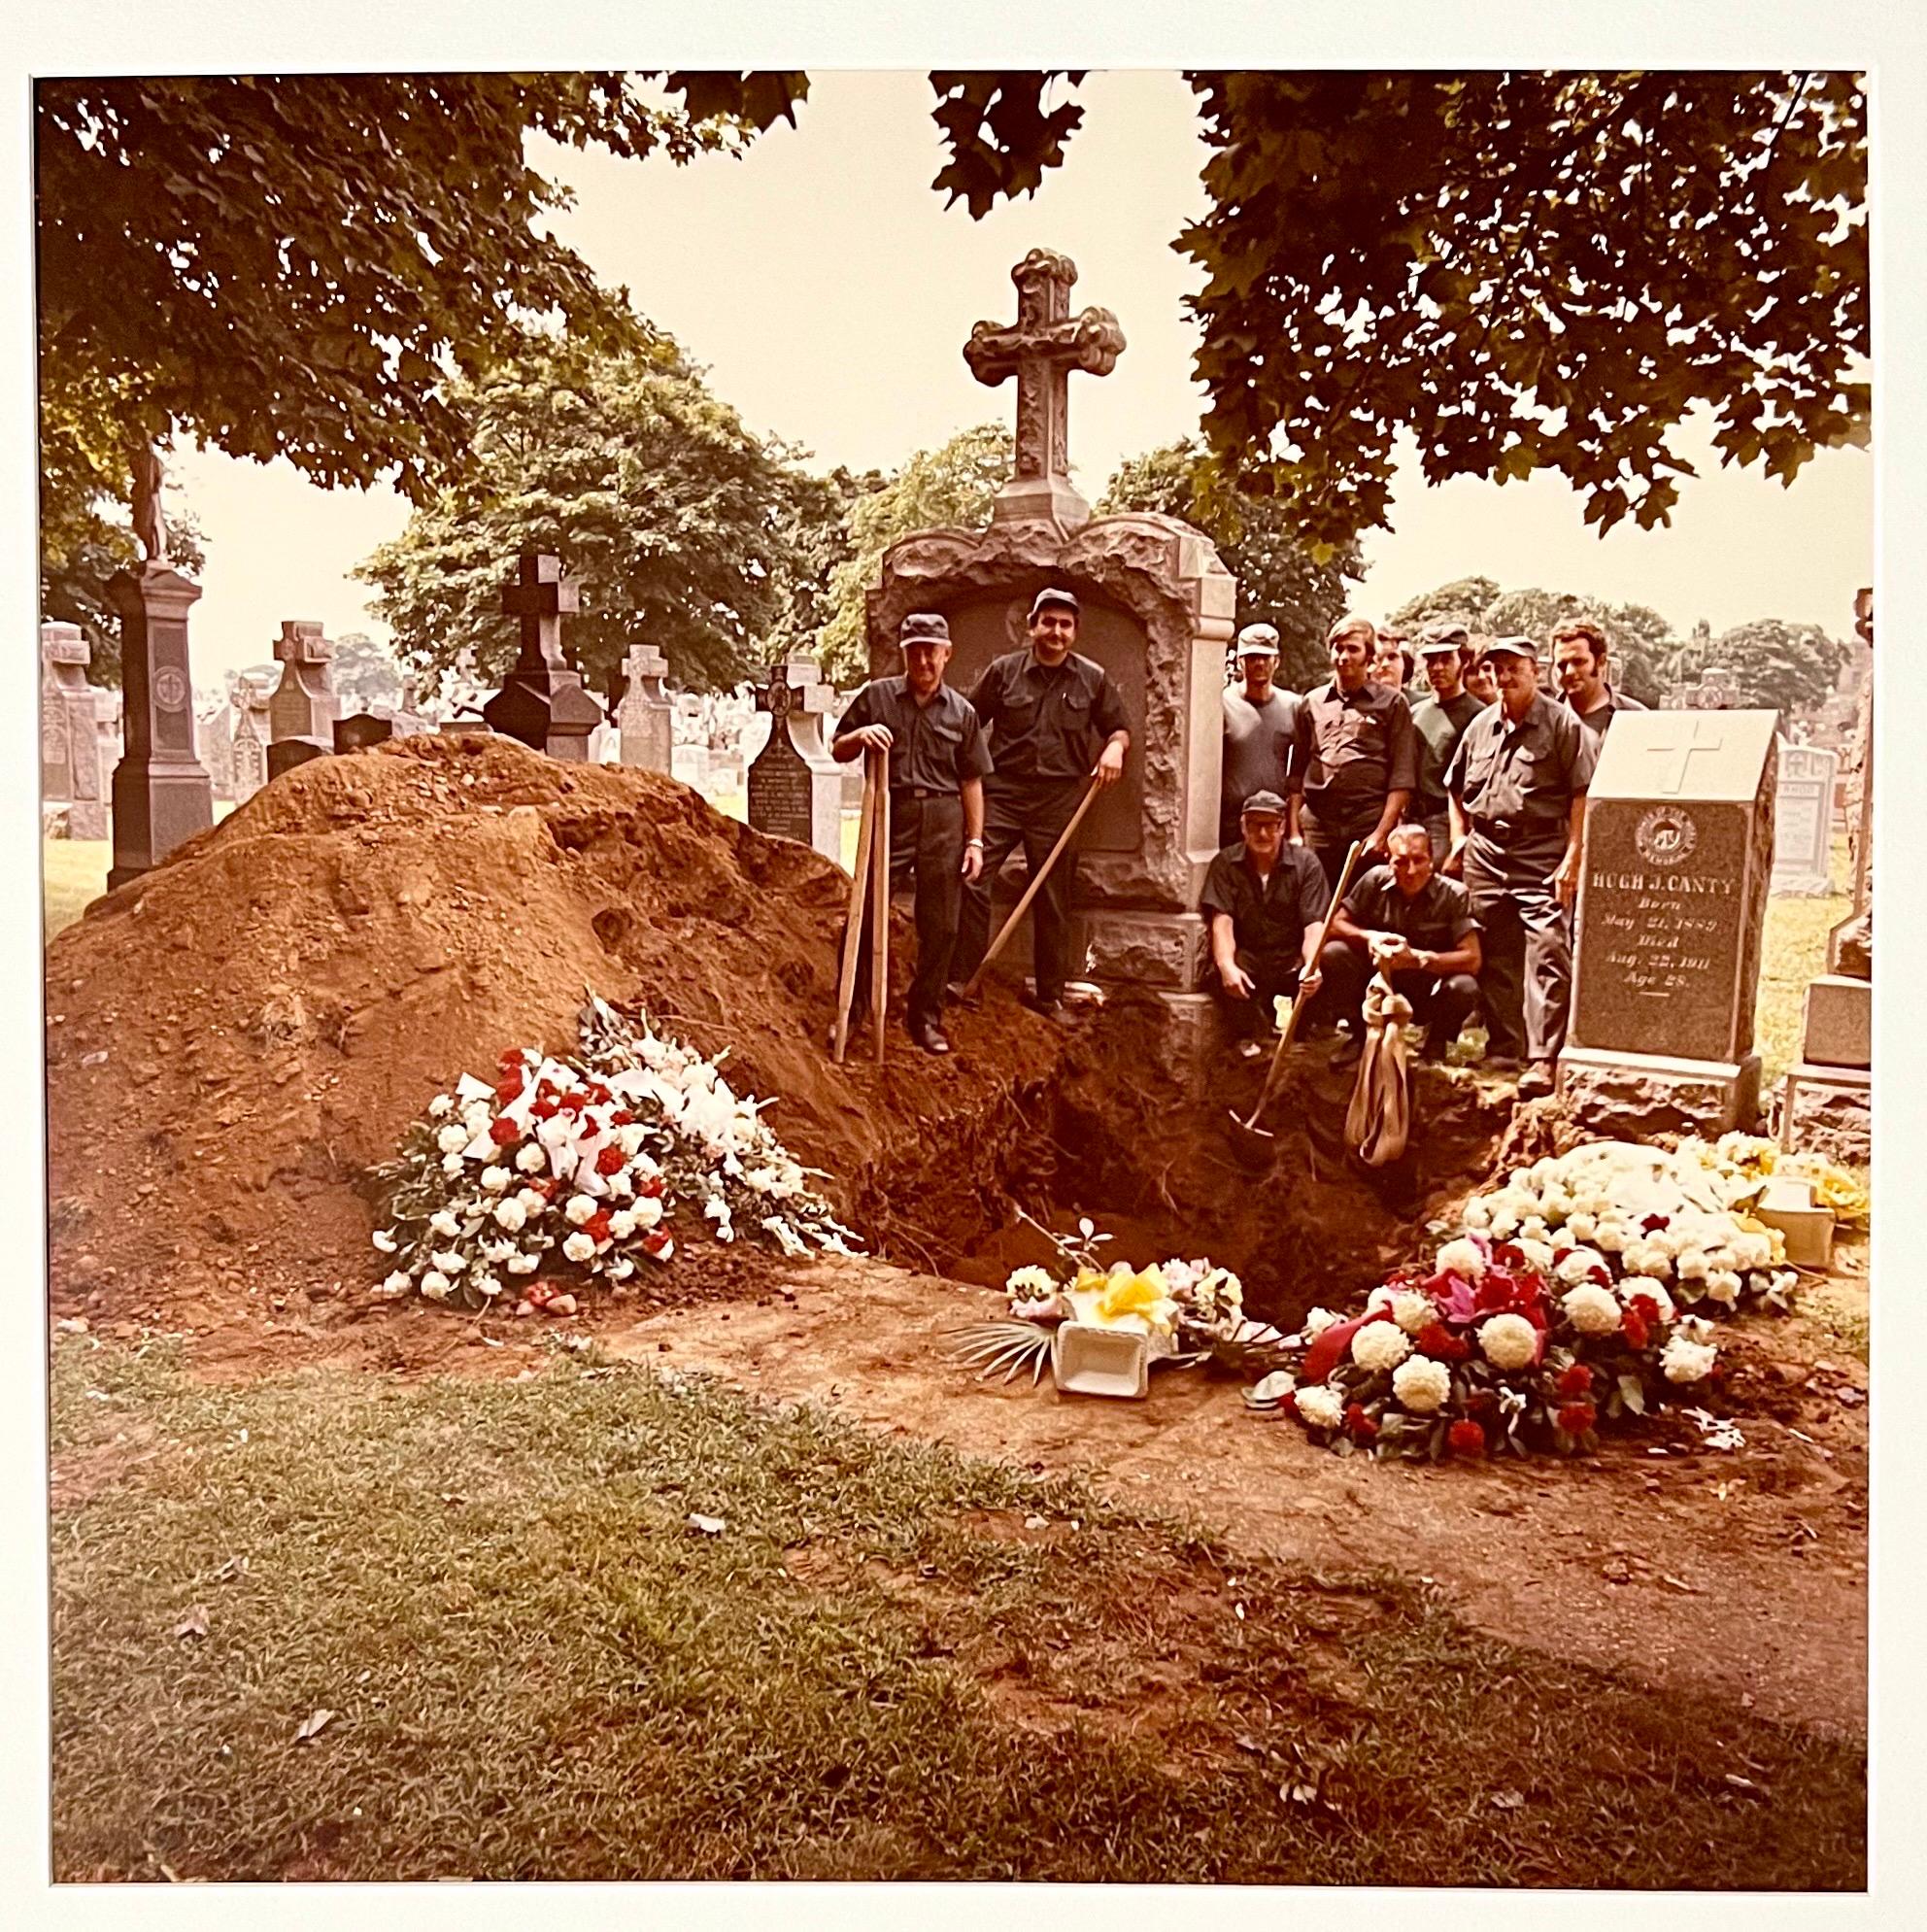 Neal Slavin (American, b. 1941)
Cemetery Workers & Green Attendants, Ridgewood, NY
Gravediggers Union
Vintage C-print [Chromogenic development print; Ektacolor prints]
Hand signed and numbered by the photographer 48/75
Photos made with 2.25 X 2.25